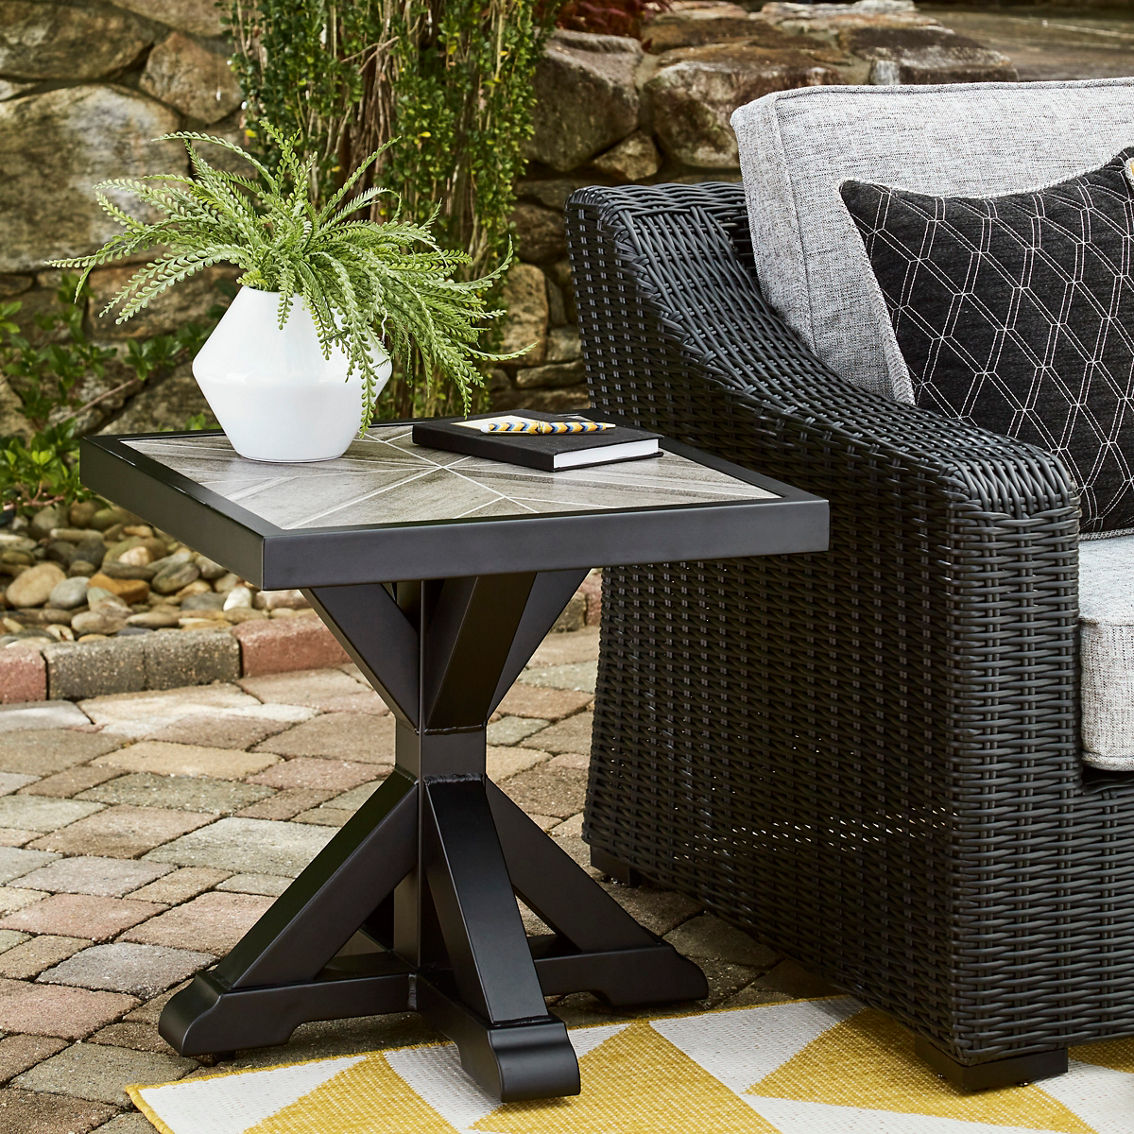 Signature Design by Ashley Beachcroft 5 pc. Outdoor Sectional with Firepit Table - Image 8 of 9